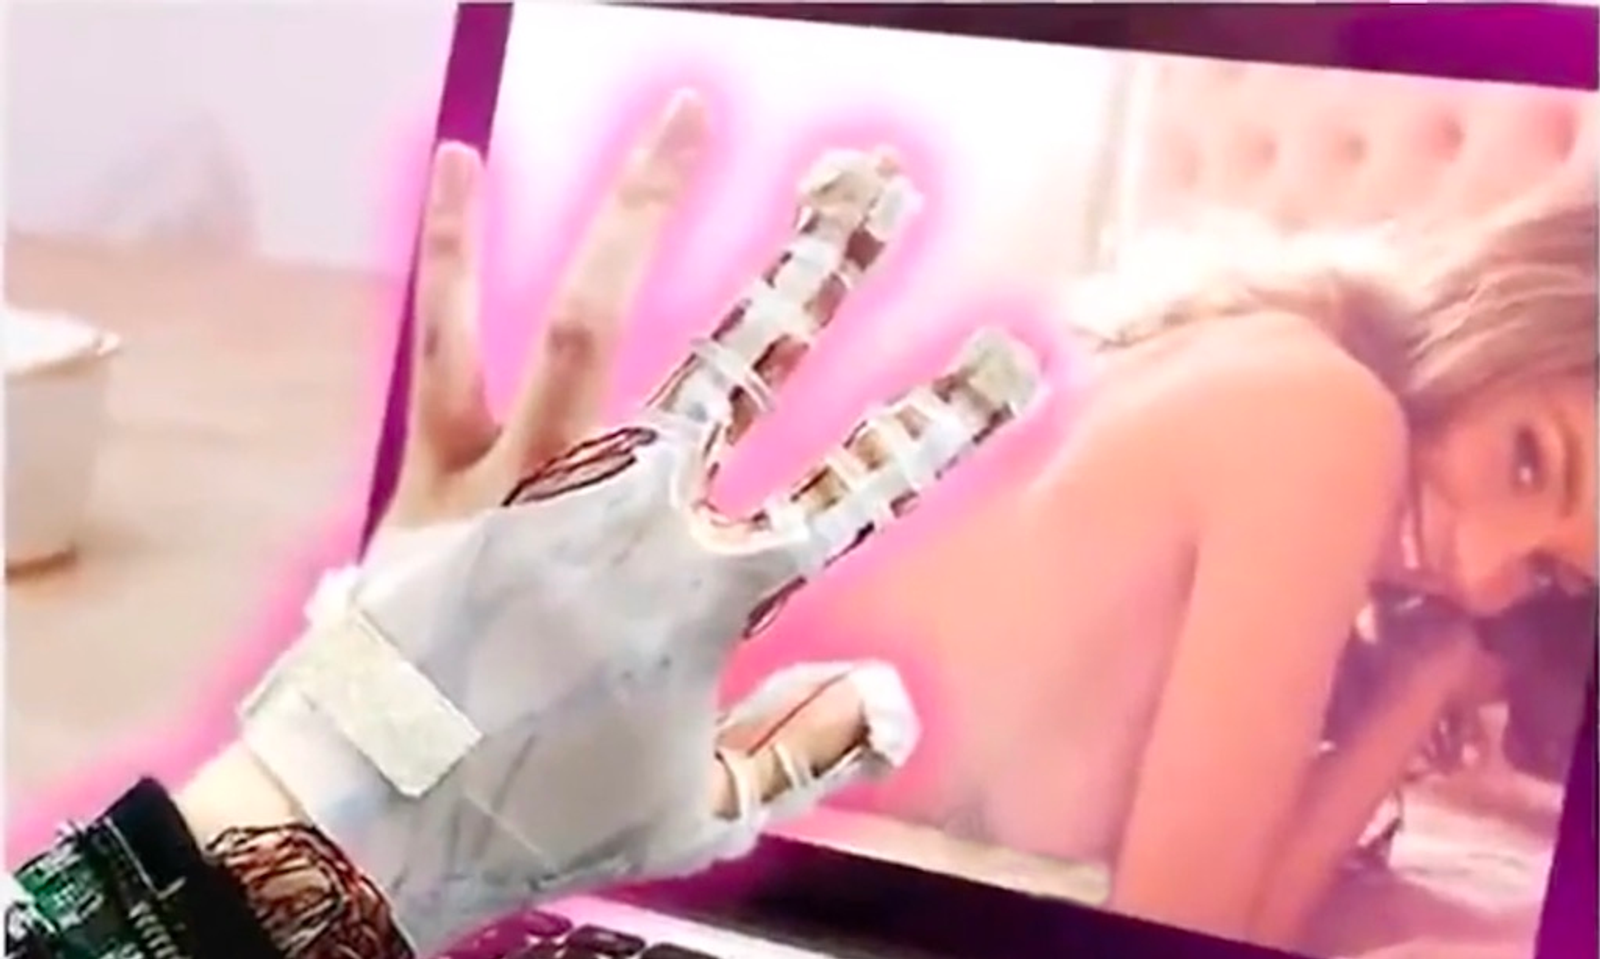 VR Glove Lets Users Feel Virtual Objects, Uses for Porn Obvious